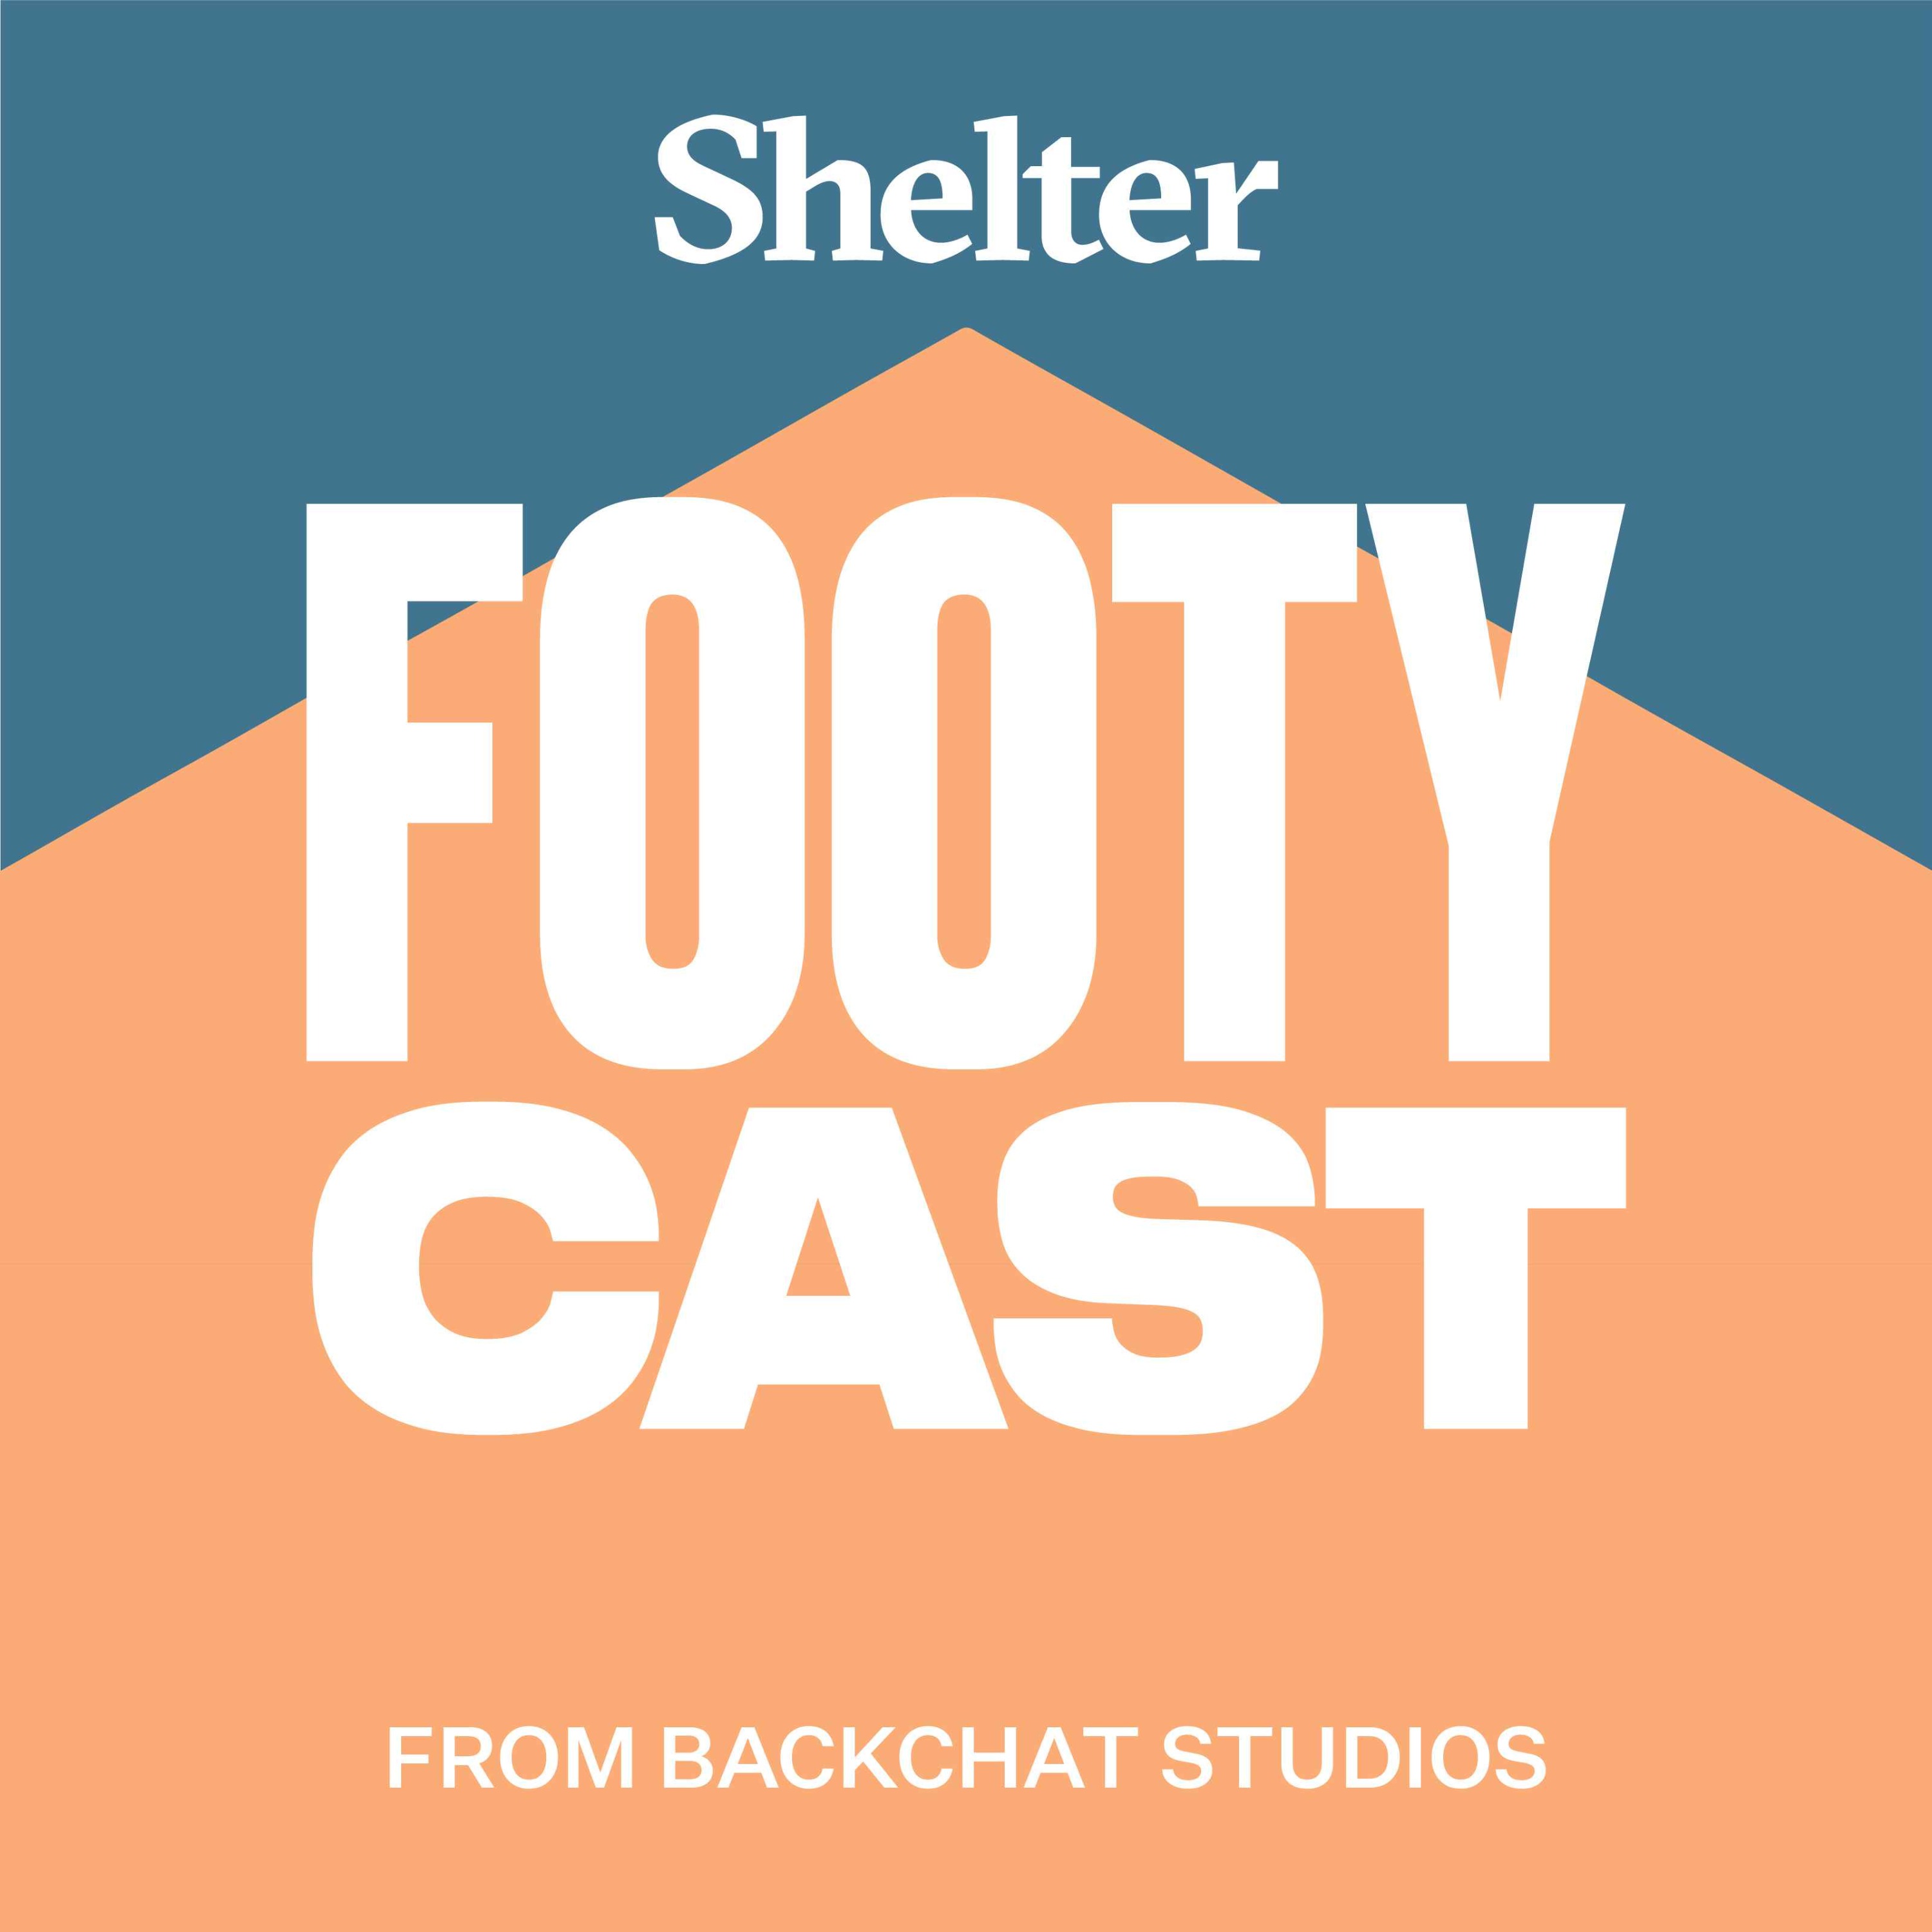 Shelter FootyCast | Get Scorched